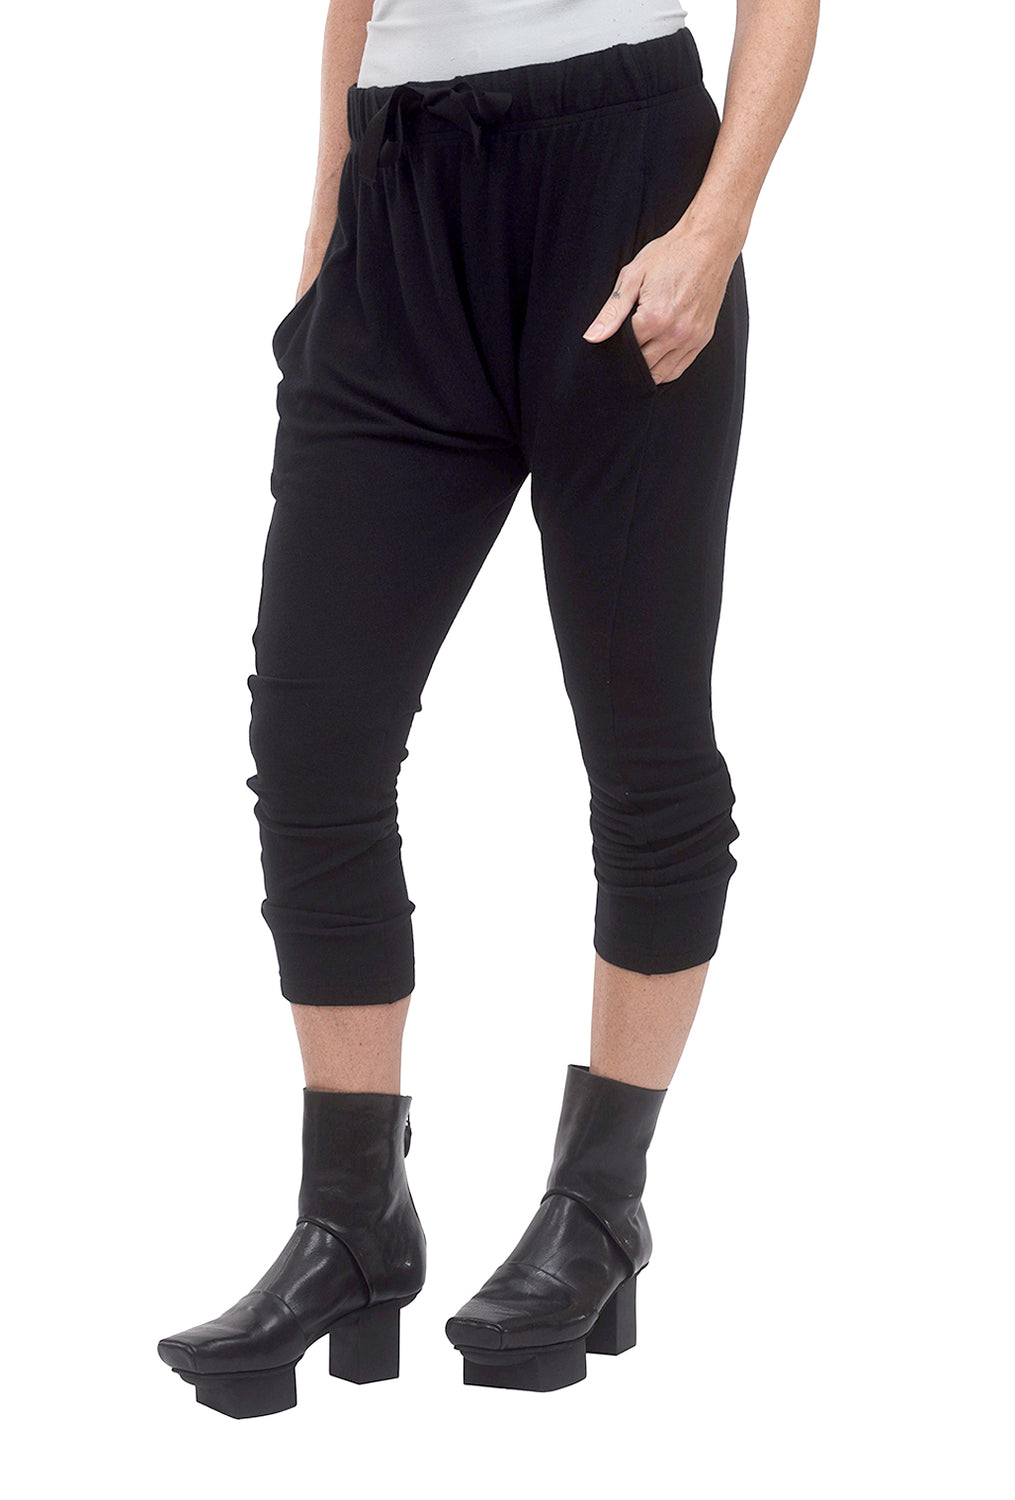 Enza Costa Peached Jersey Slouch Pant, Black 